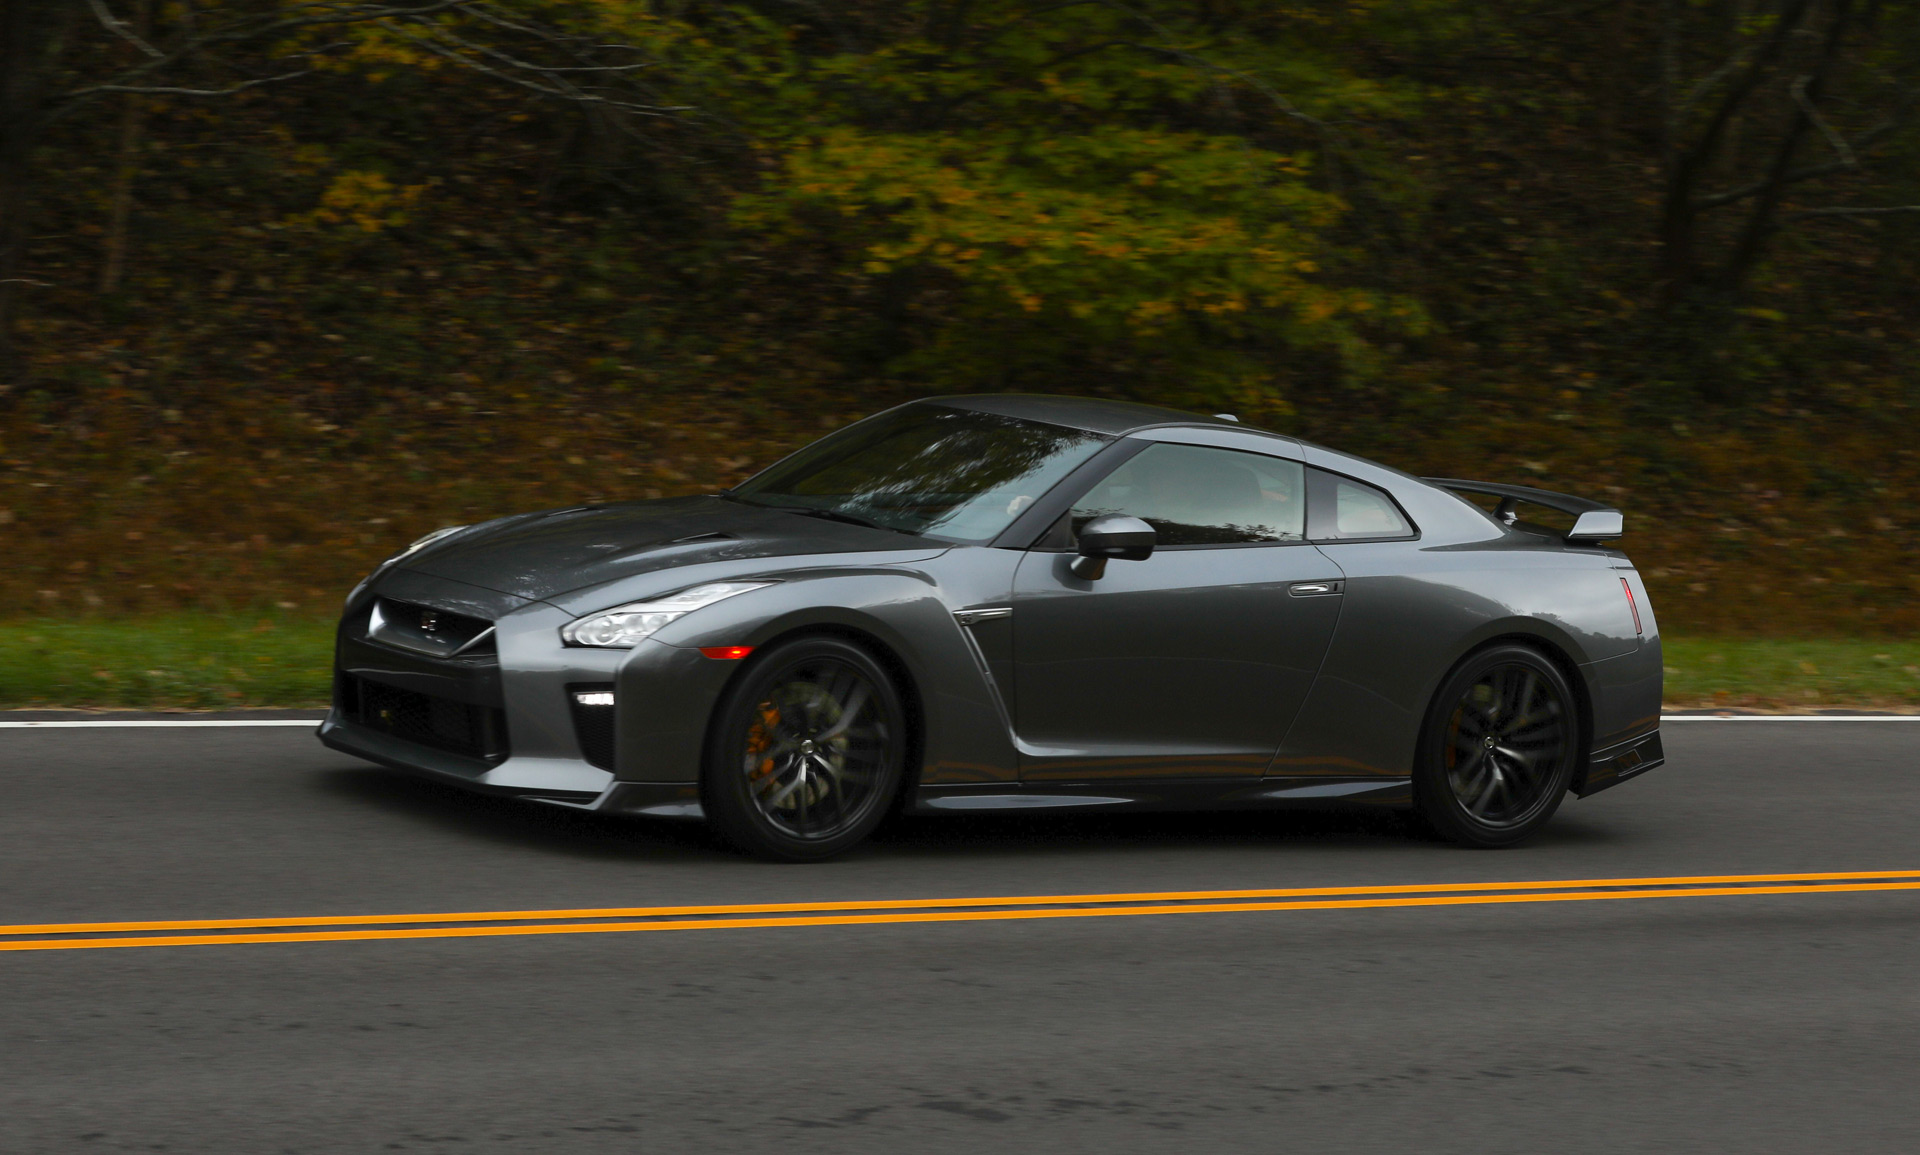 2018 Nissan GT-R given $10,000 price cut